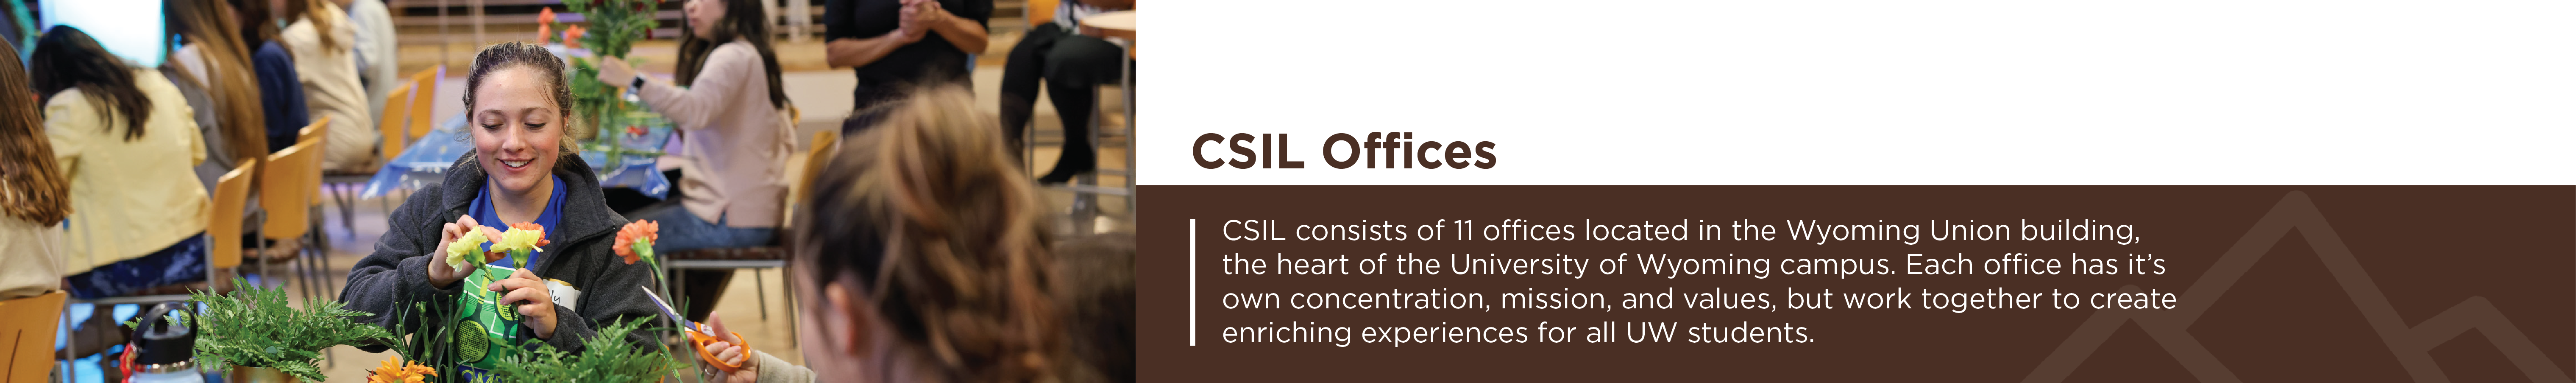 CSIL consists of 11 offices located in the Wyoming Union building in  the heart of the University of Wyoming campus. Each office has it’s  own concentration, mission, and values, but work together to create enriching experiences for UW students.  